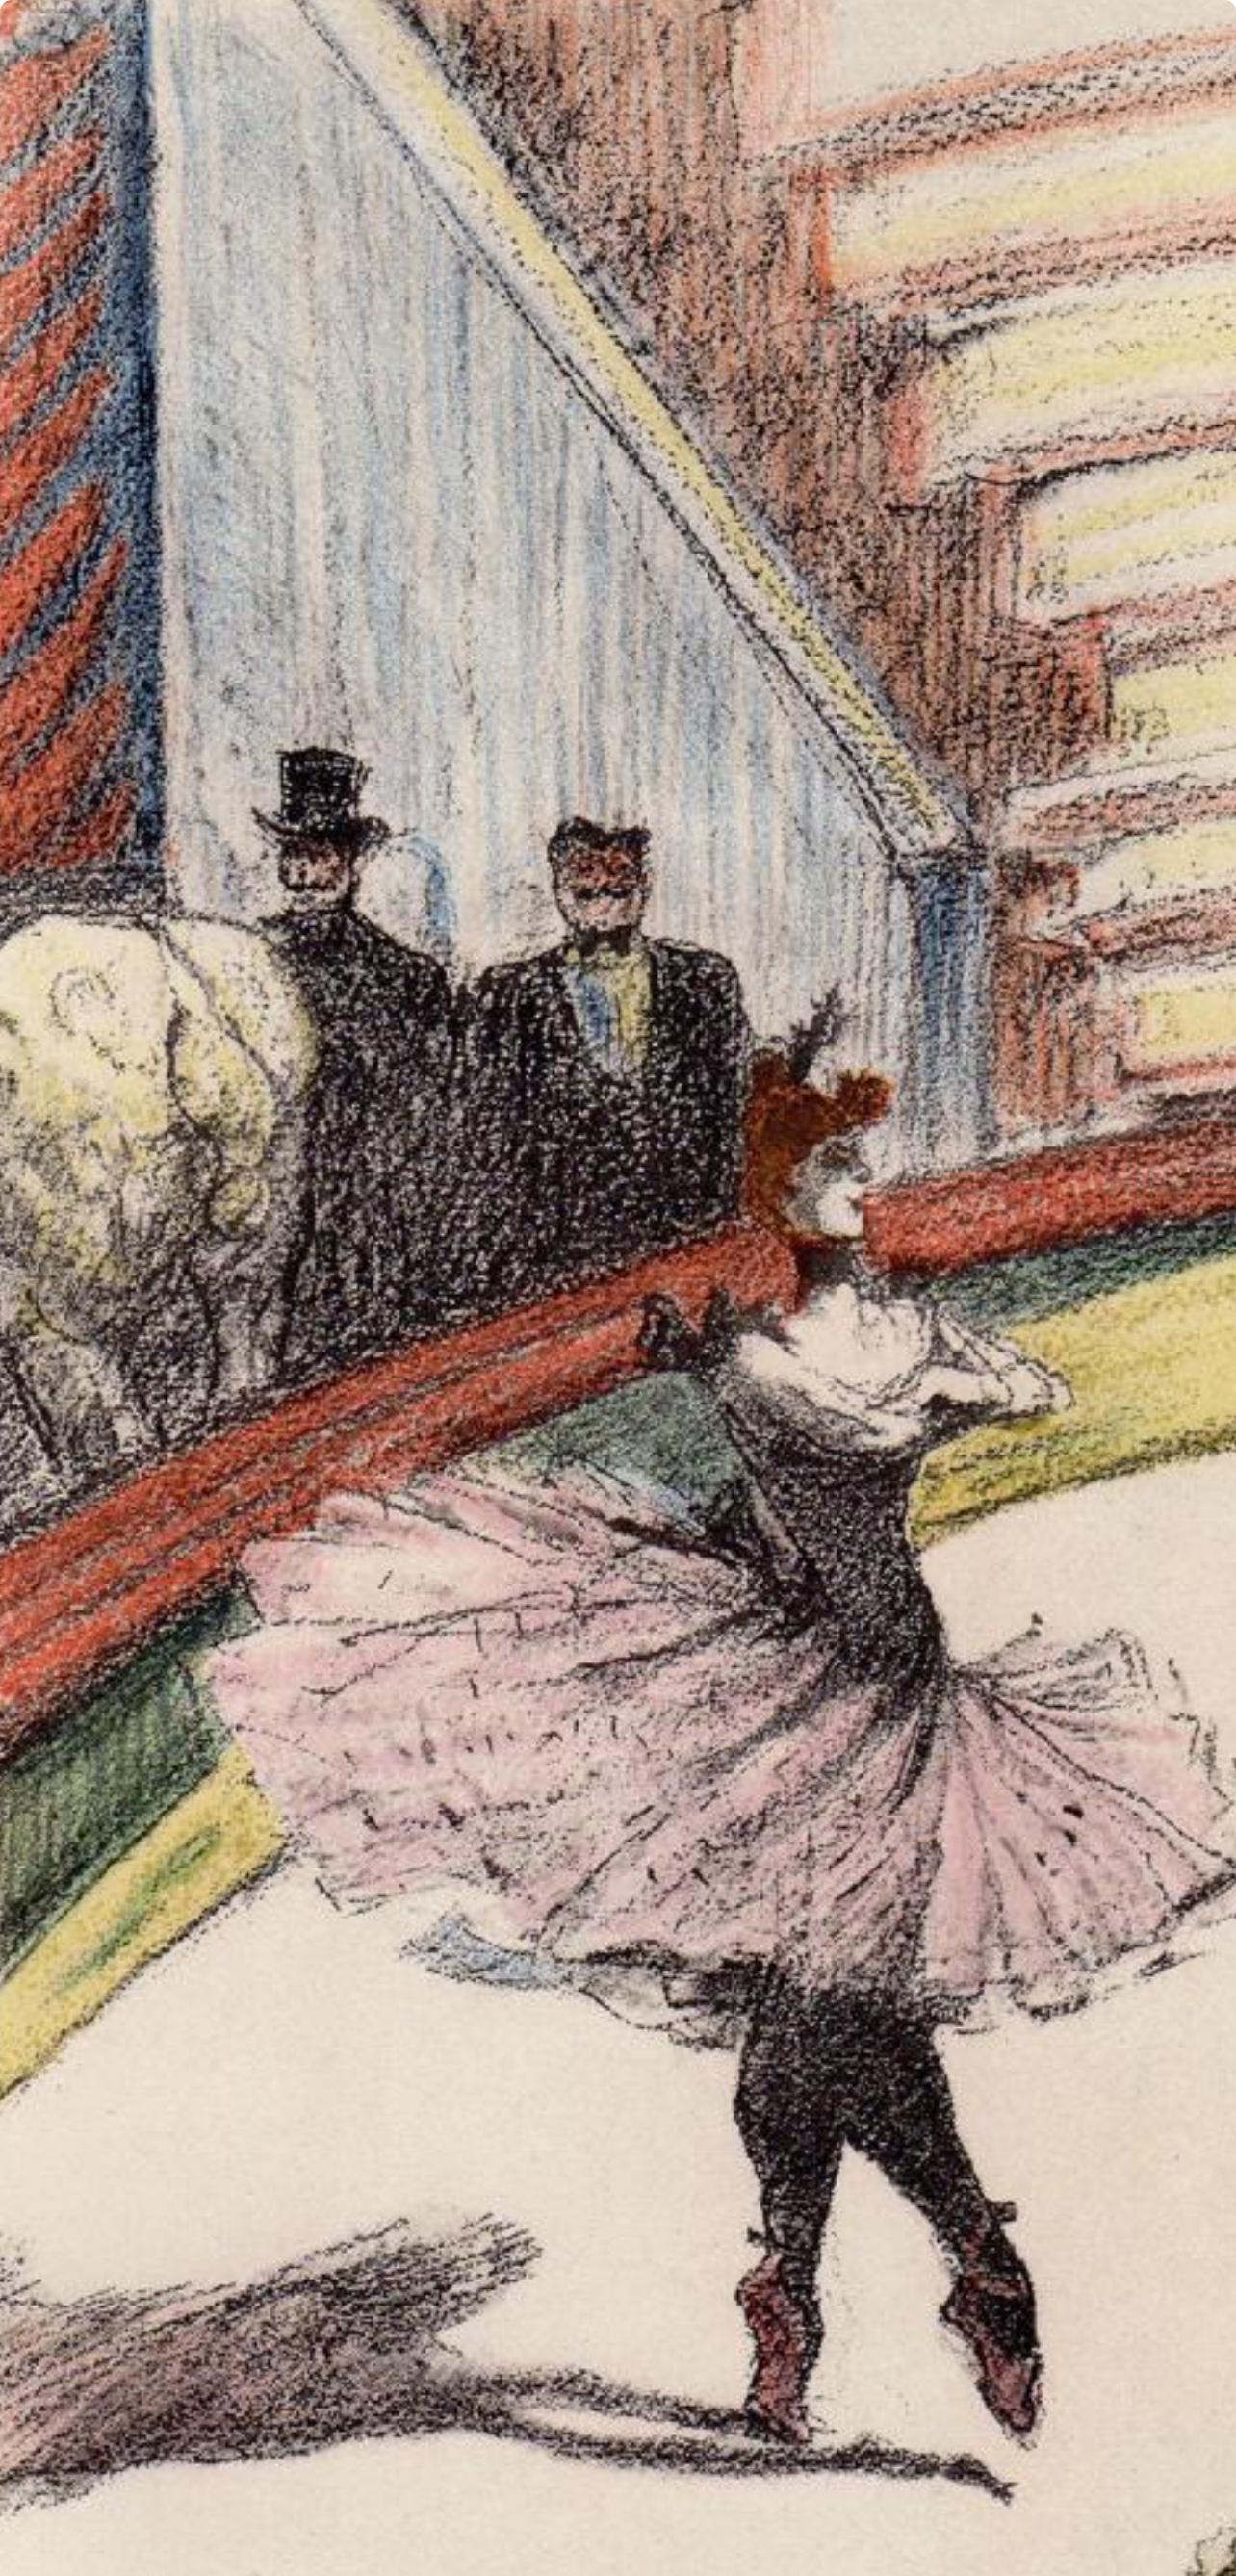 Lithograph on wove paper.  Unsigned and unnumbered, as issued. Good Condition; never framed or matted. Notes: From the volume, The Circus by Toulouse-Lautrec, 1952. Published the Paris Book Center, New York and André Sauret, Paris; printed by